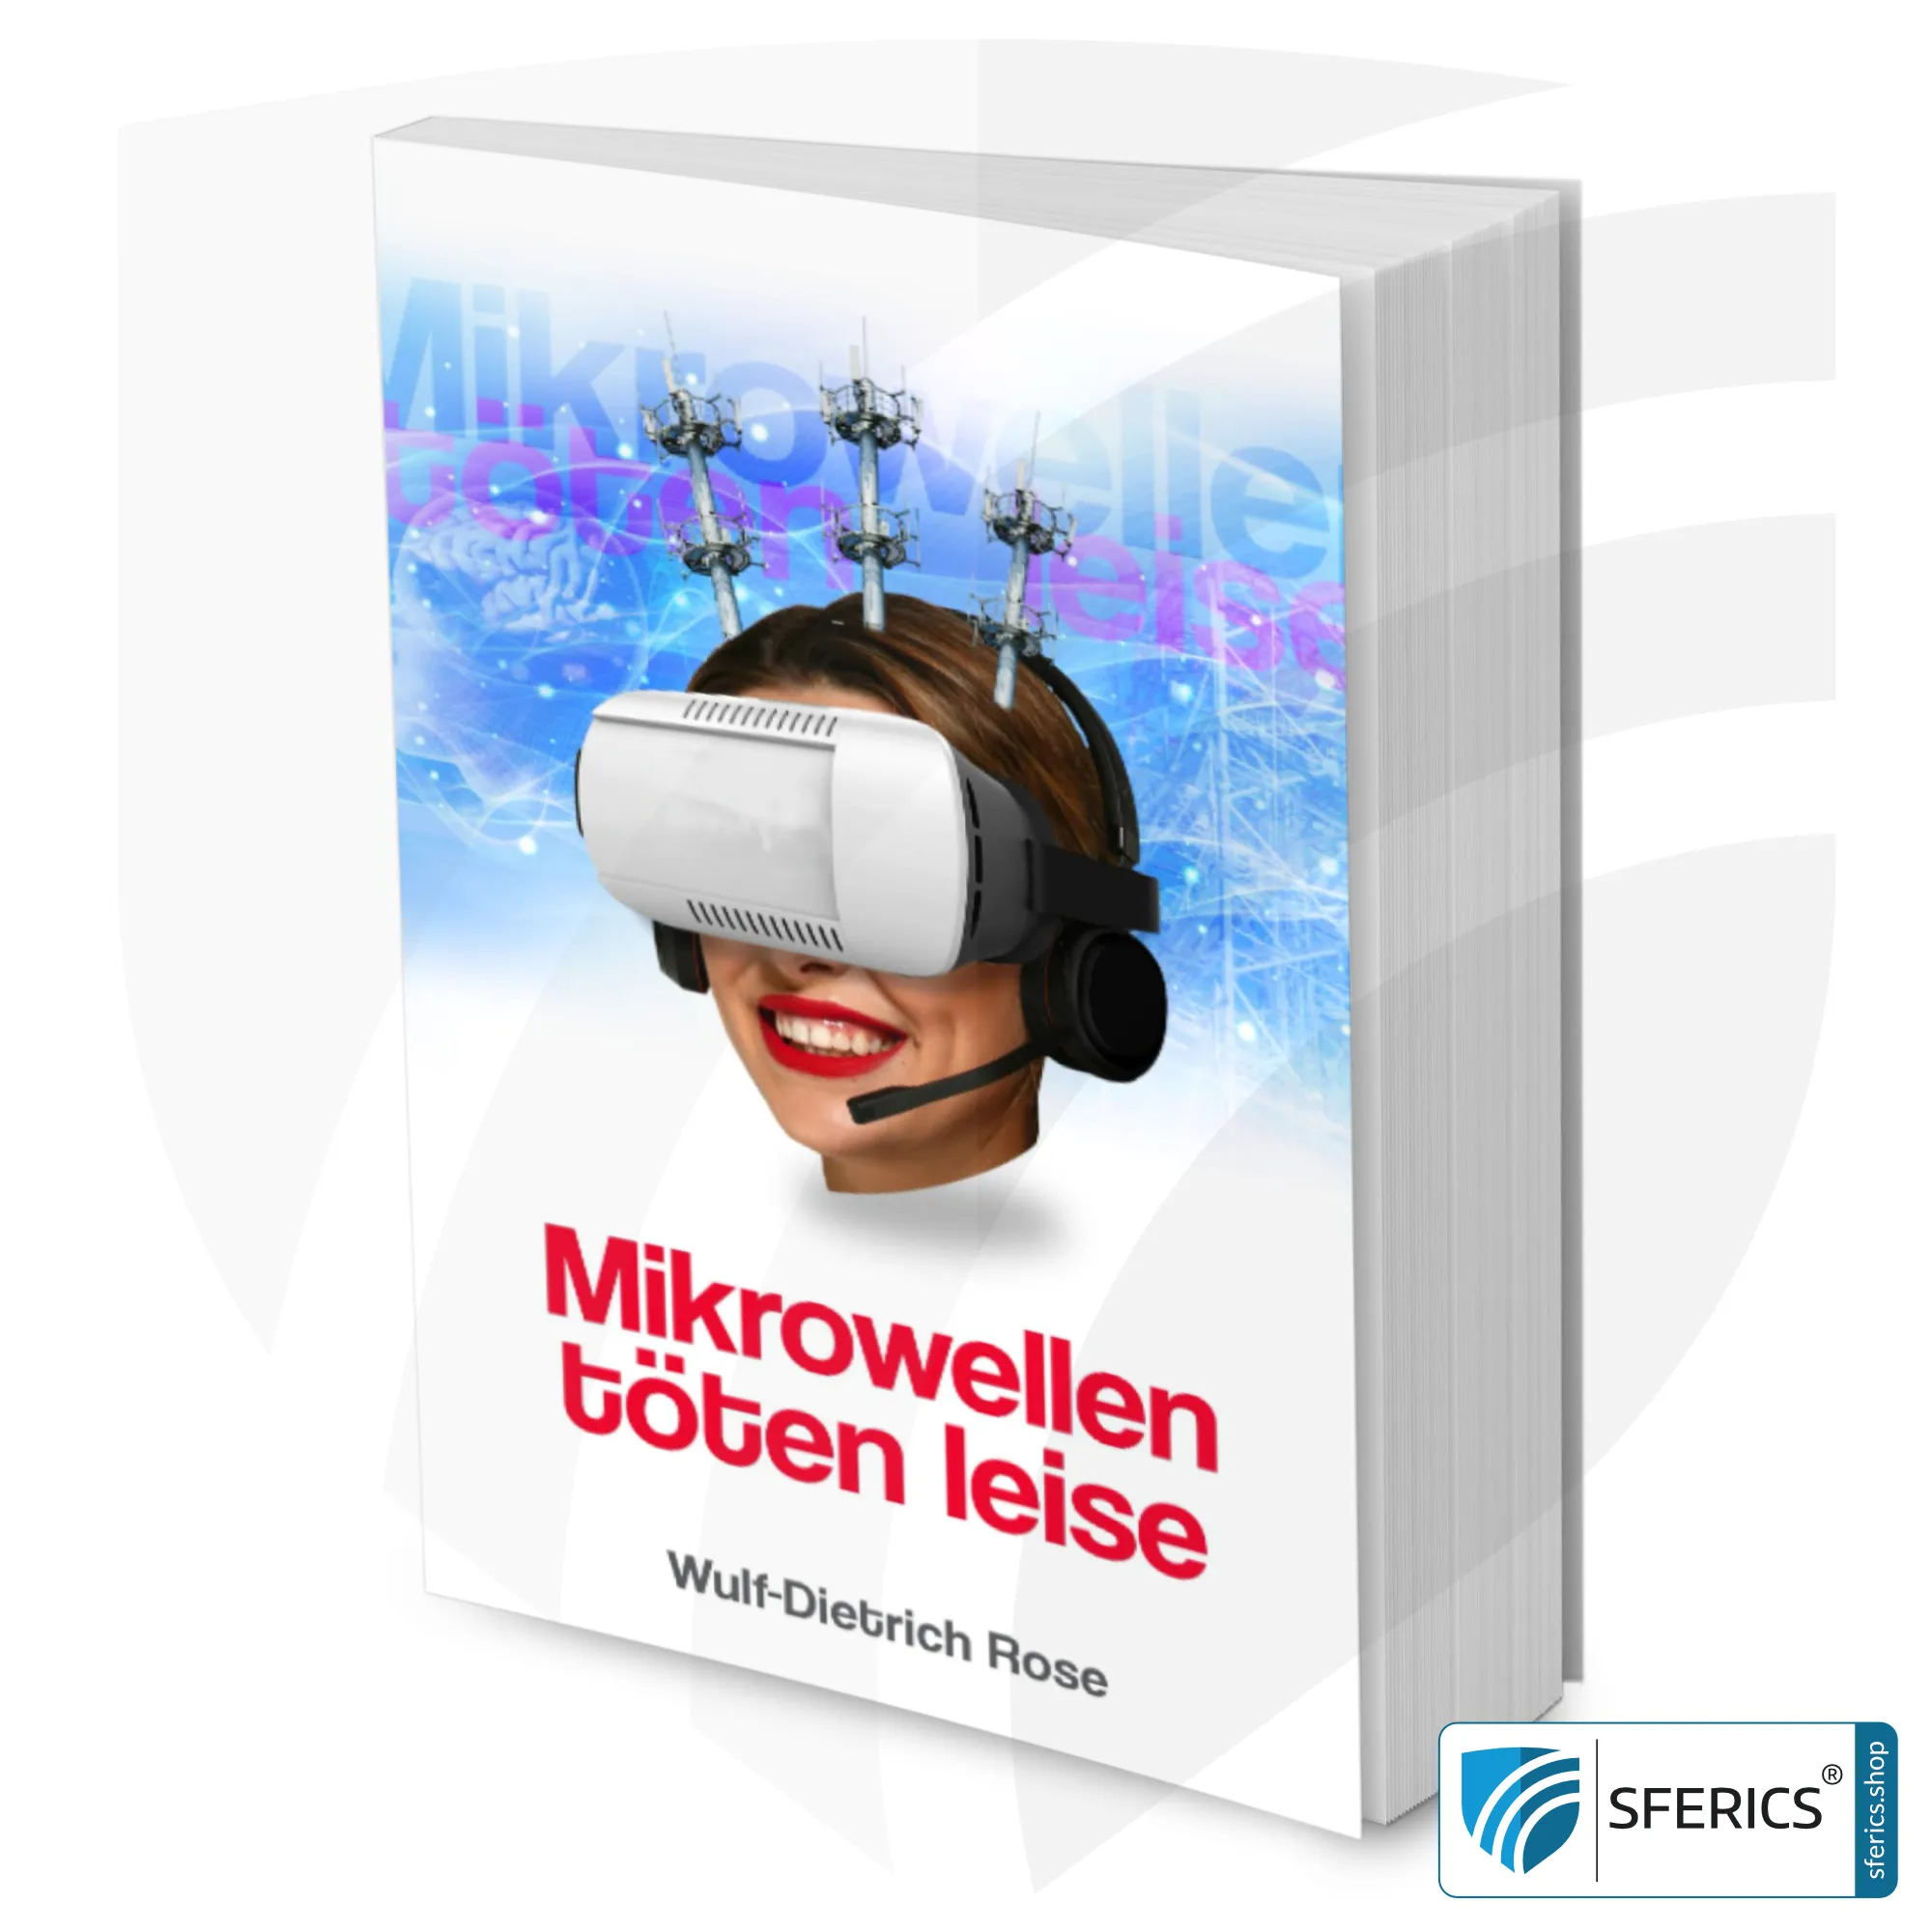 Microwaves kill silently | Paperback by Wulf Dietrich Rose | German language